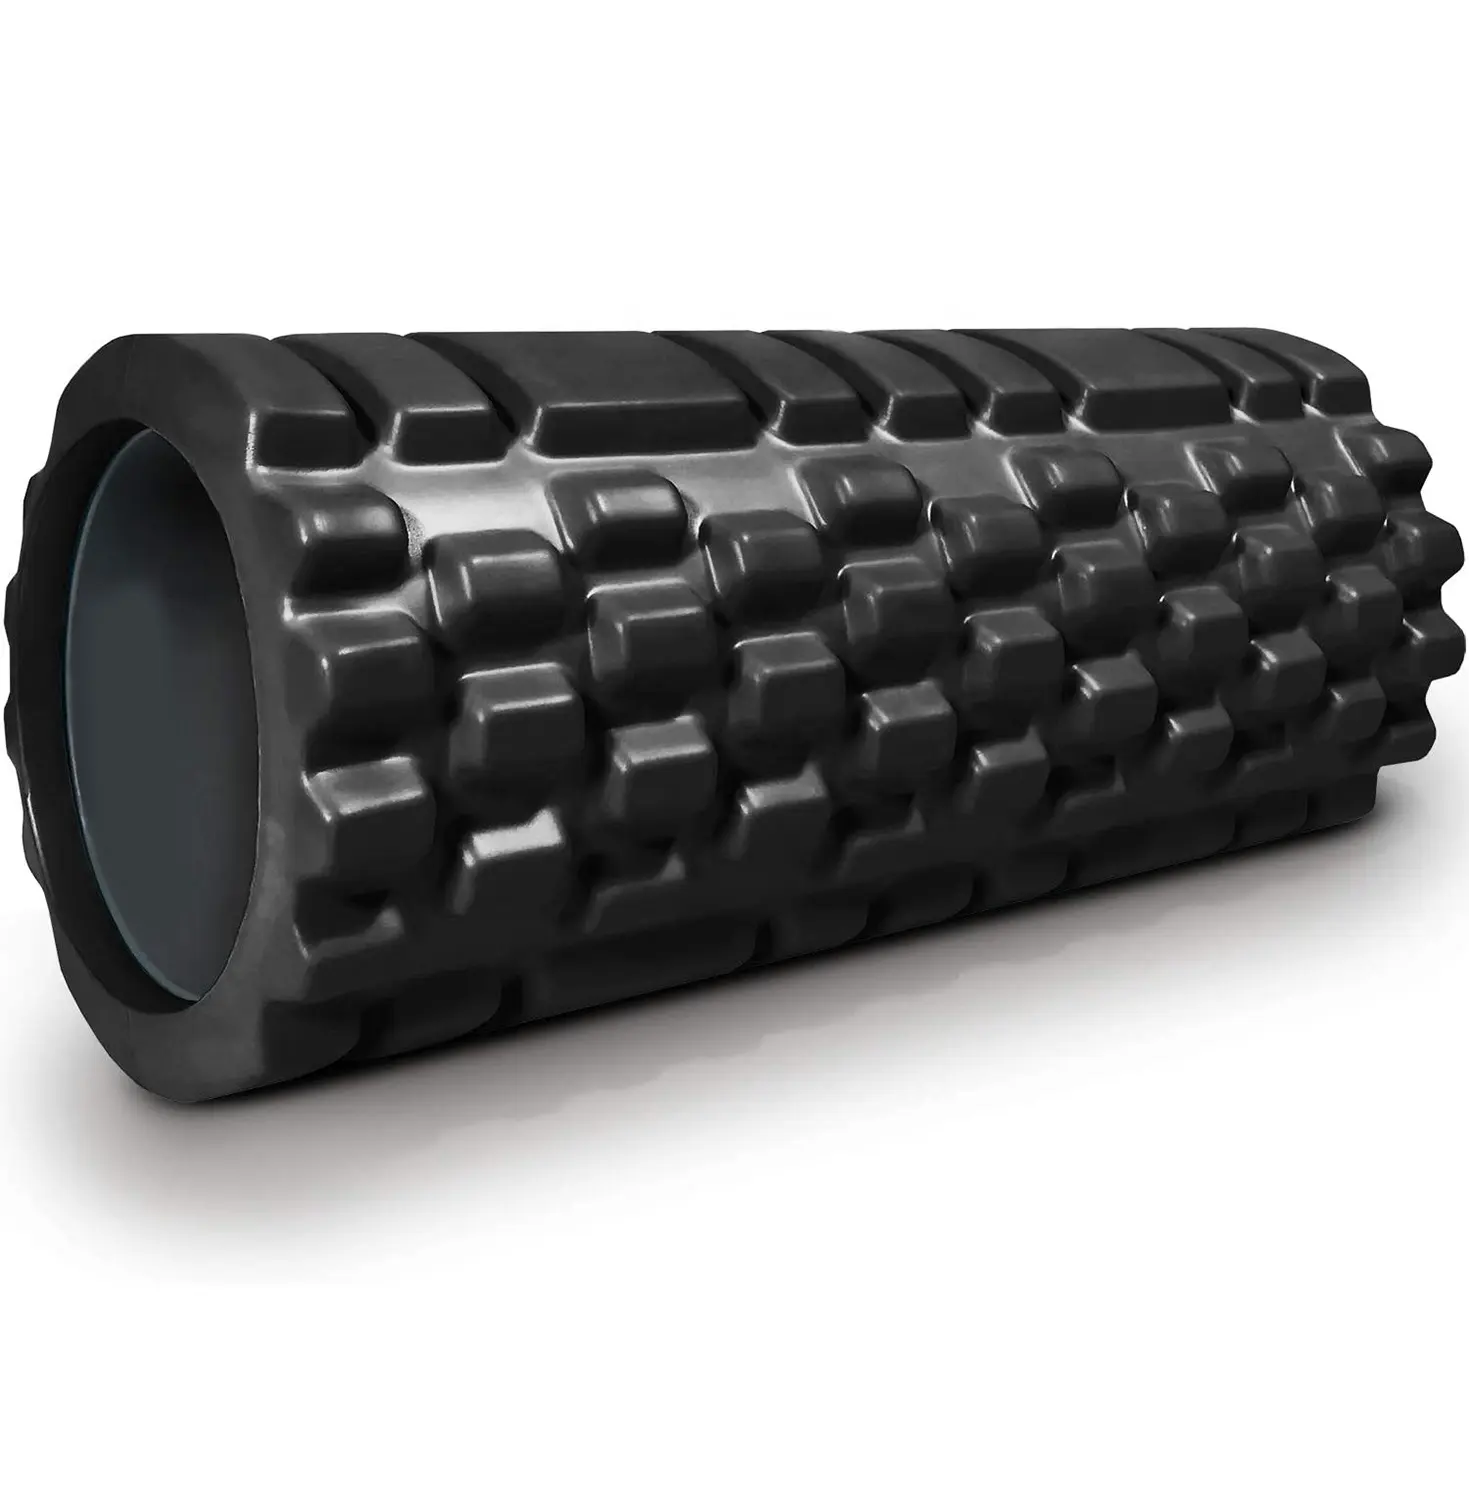 Foam Roller Deep Tissue Massager for muscle and myofascial trigger point relief Machines Exercise Yoga Roller